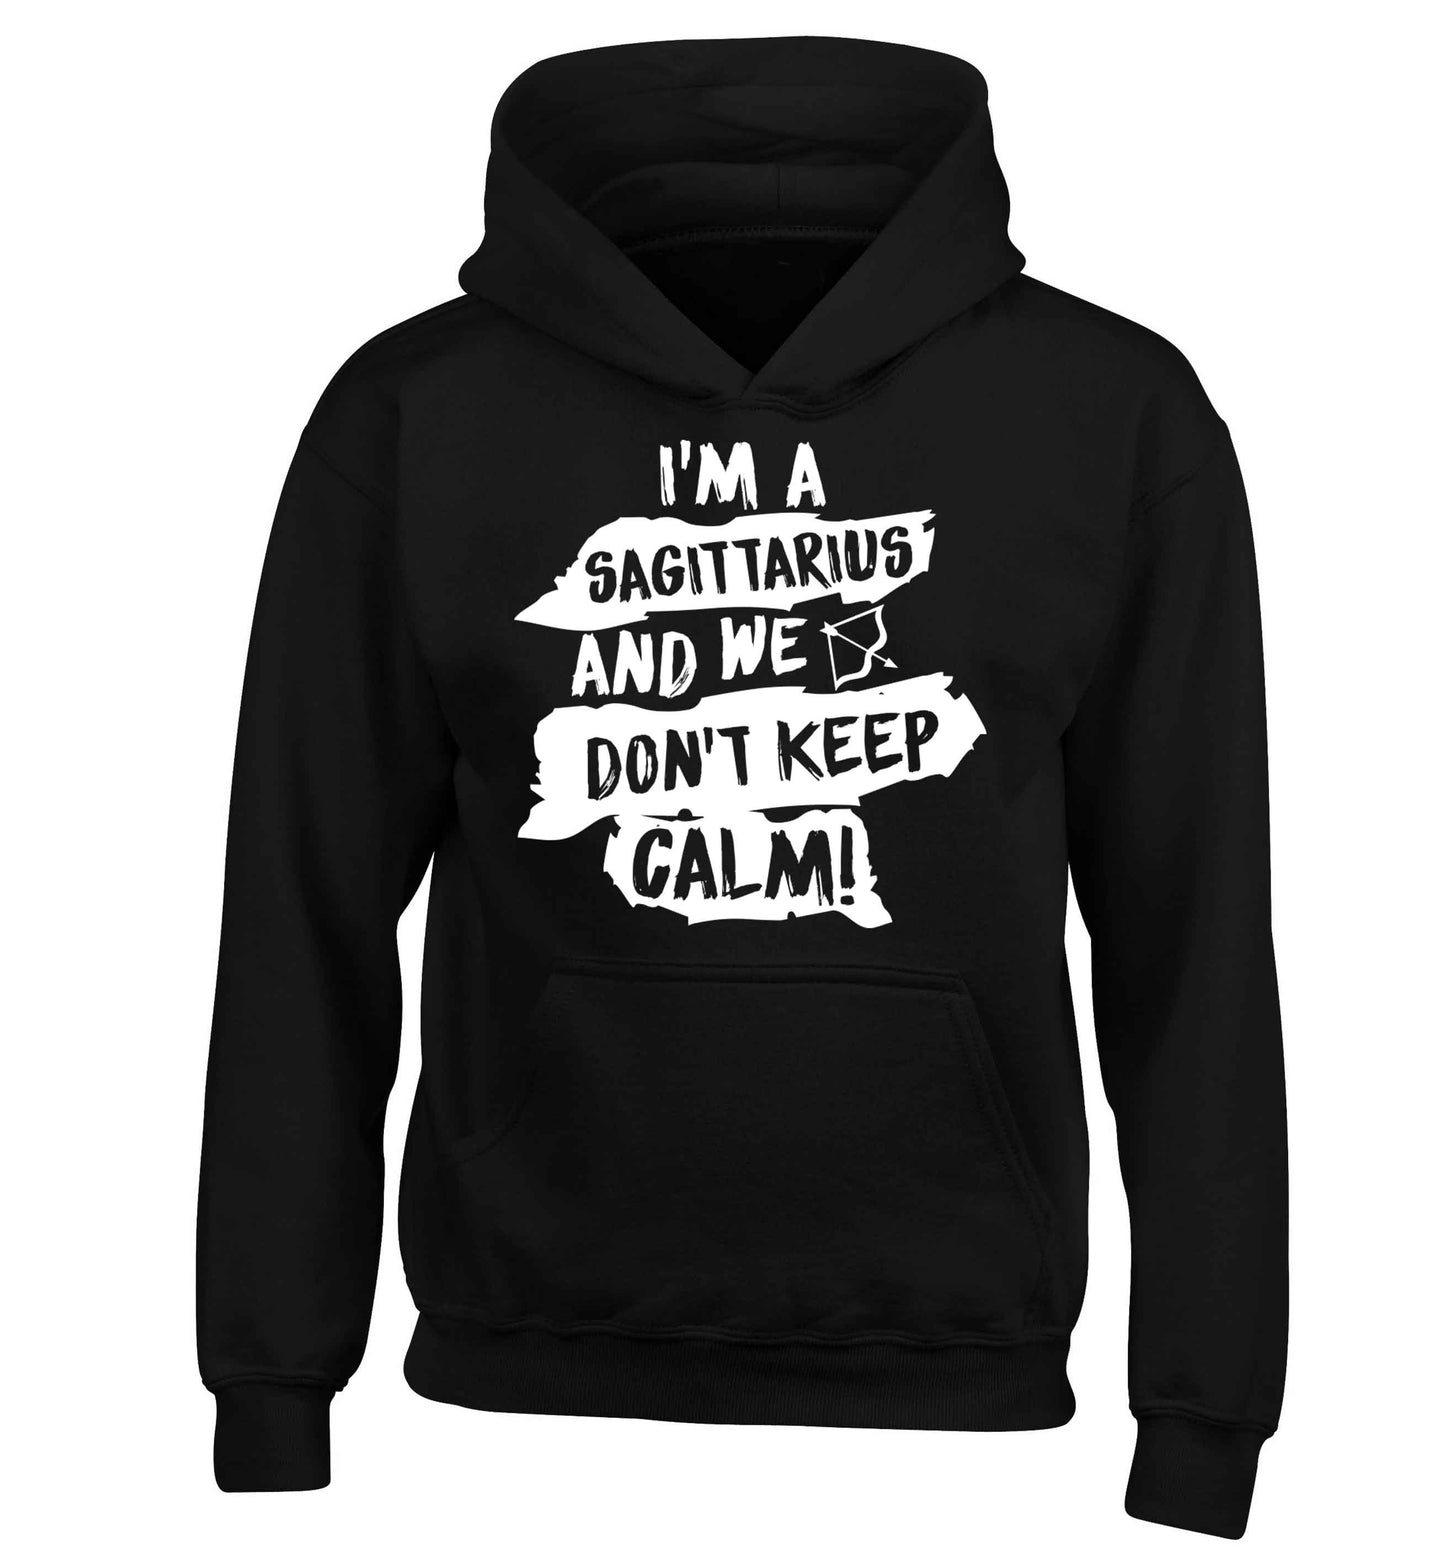 I'm a sagittarius and we don't keep calm children's black hoodie 12-13 Years